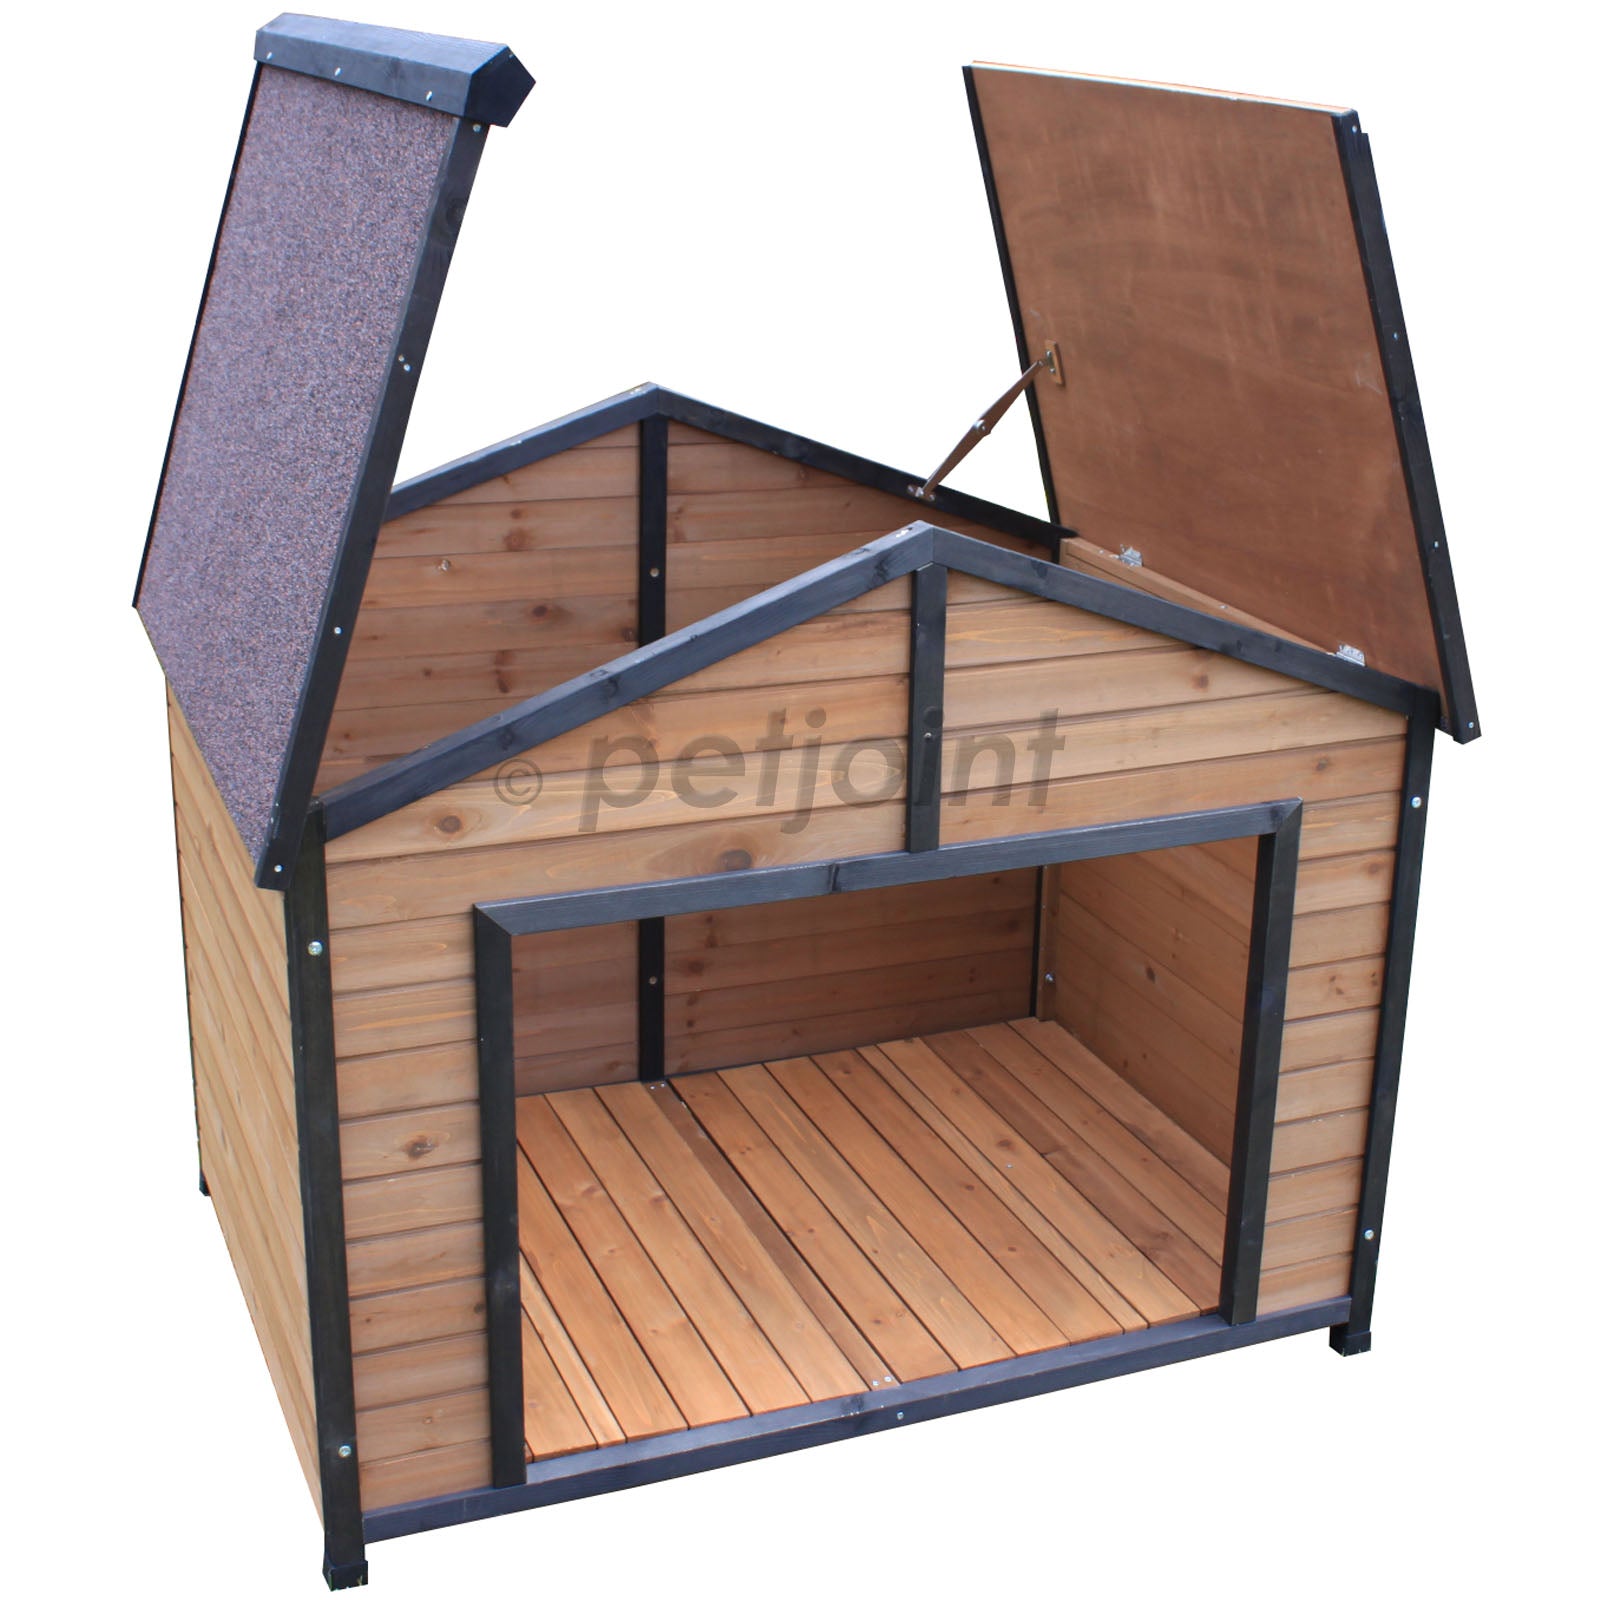 extra large insulated dog kennel